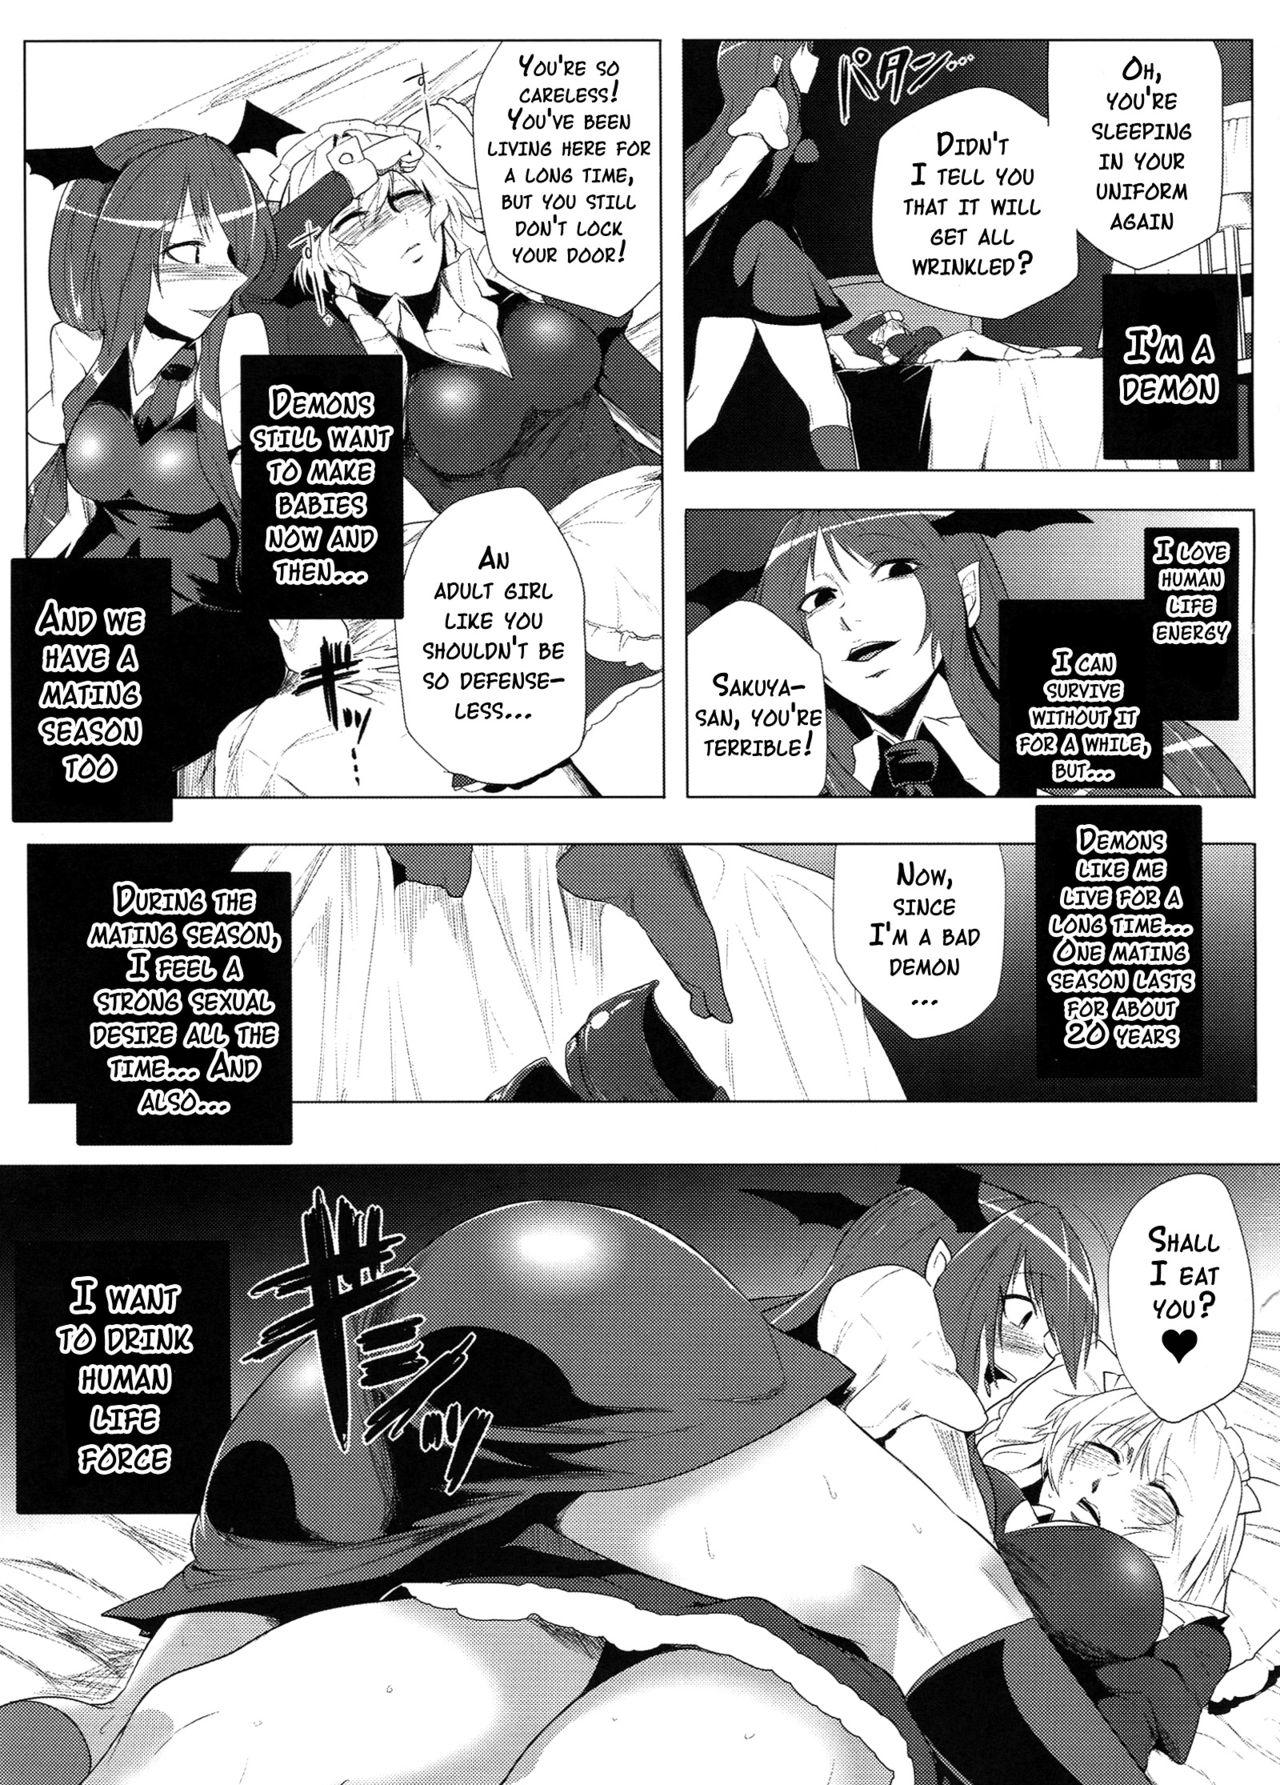 Bitch THE BEGINNING OF THE END OF ETERNITY - Touhou project Cumfacial - Page 8